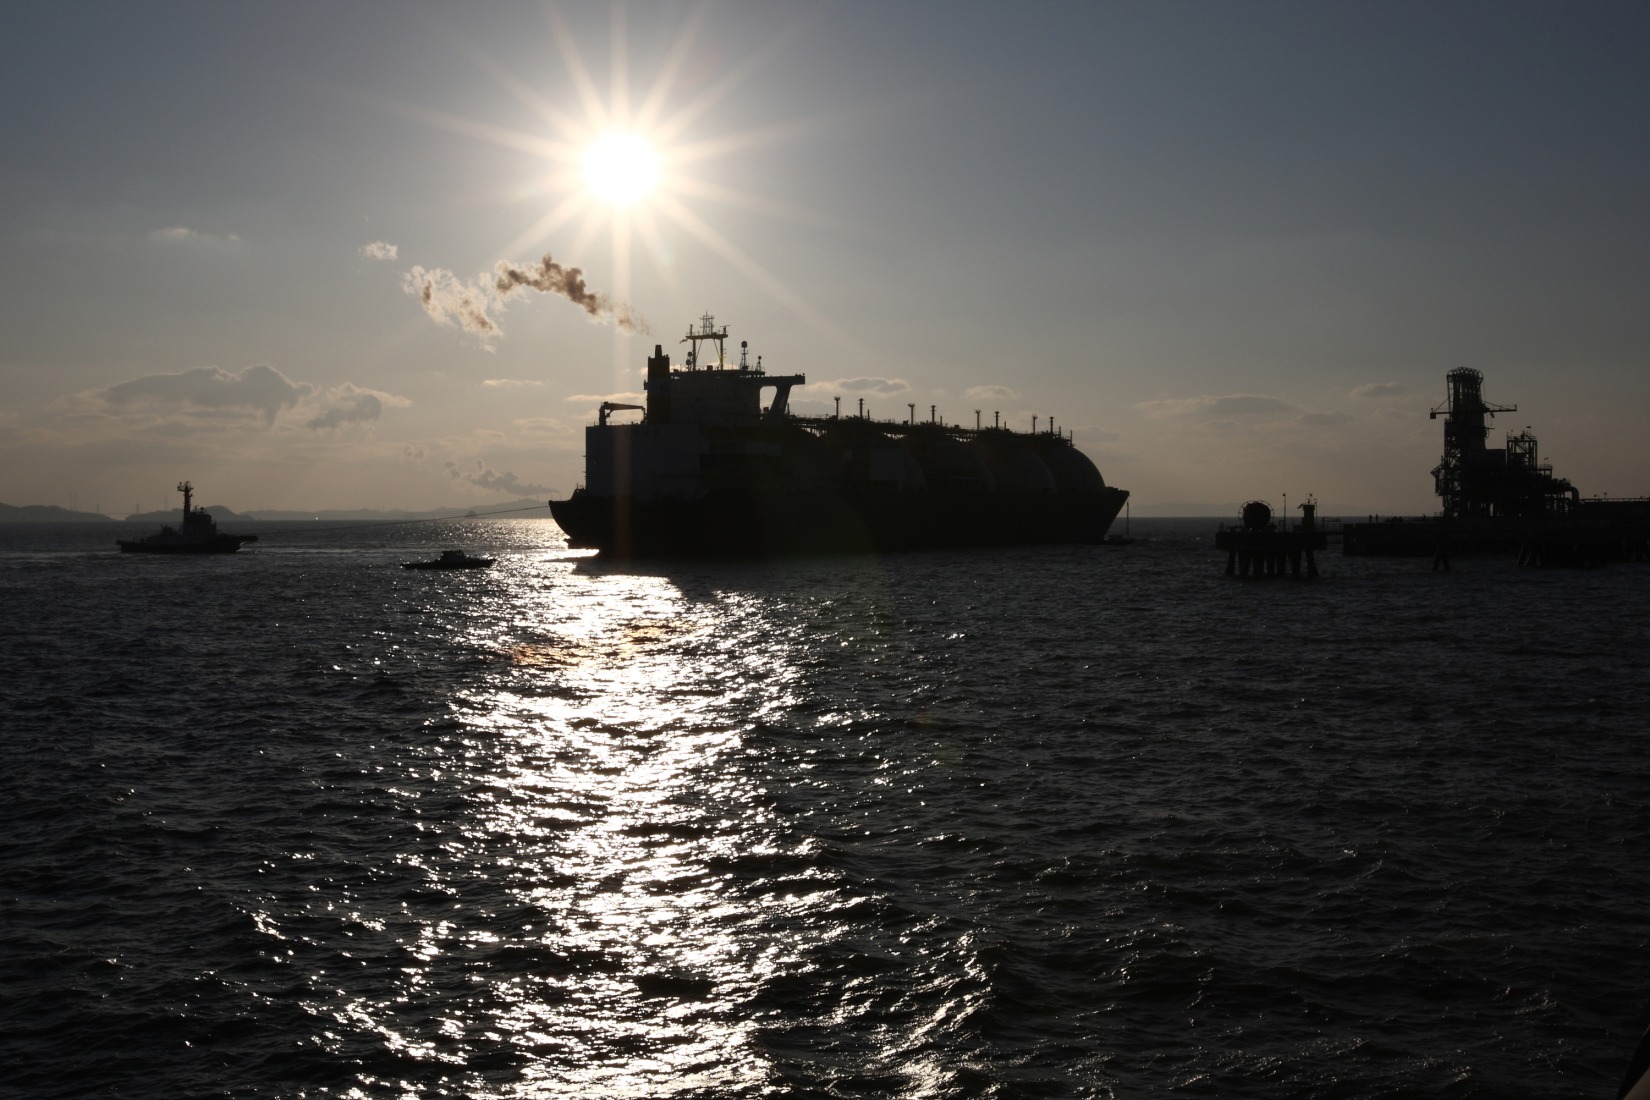 LNG Demand Increase In Asia Signals 2011 Rally